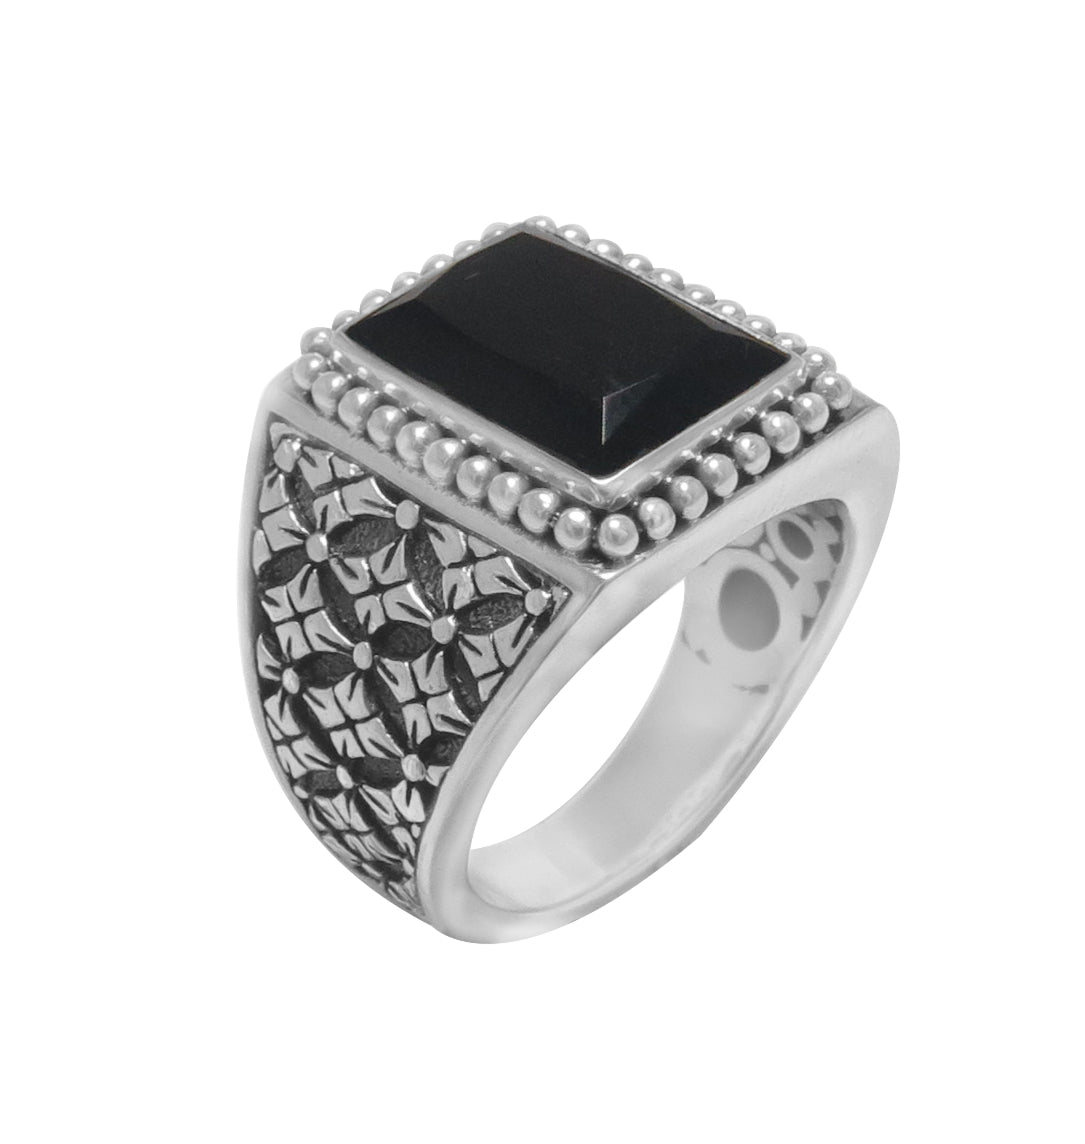 SS SQUARE ONYX RING  WITH BEADING AND FILIGREE DESIGN